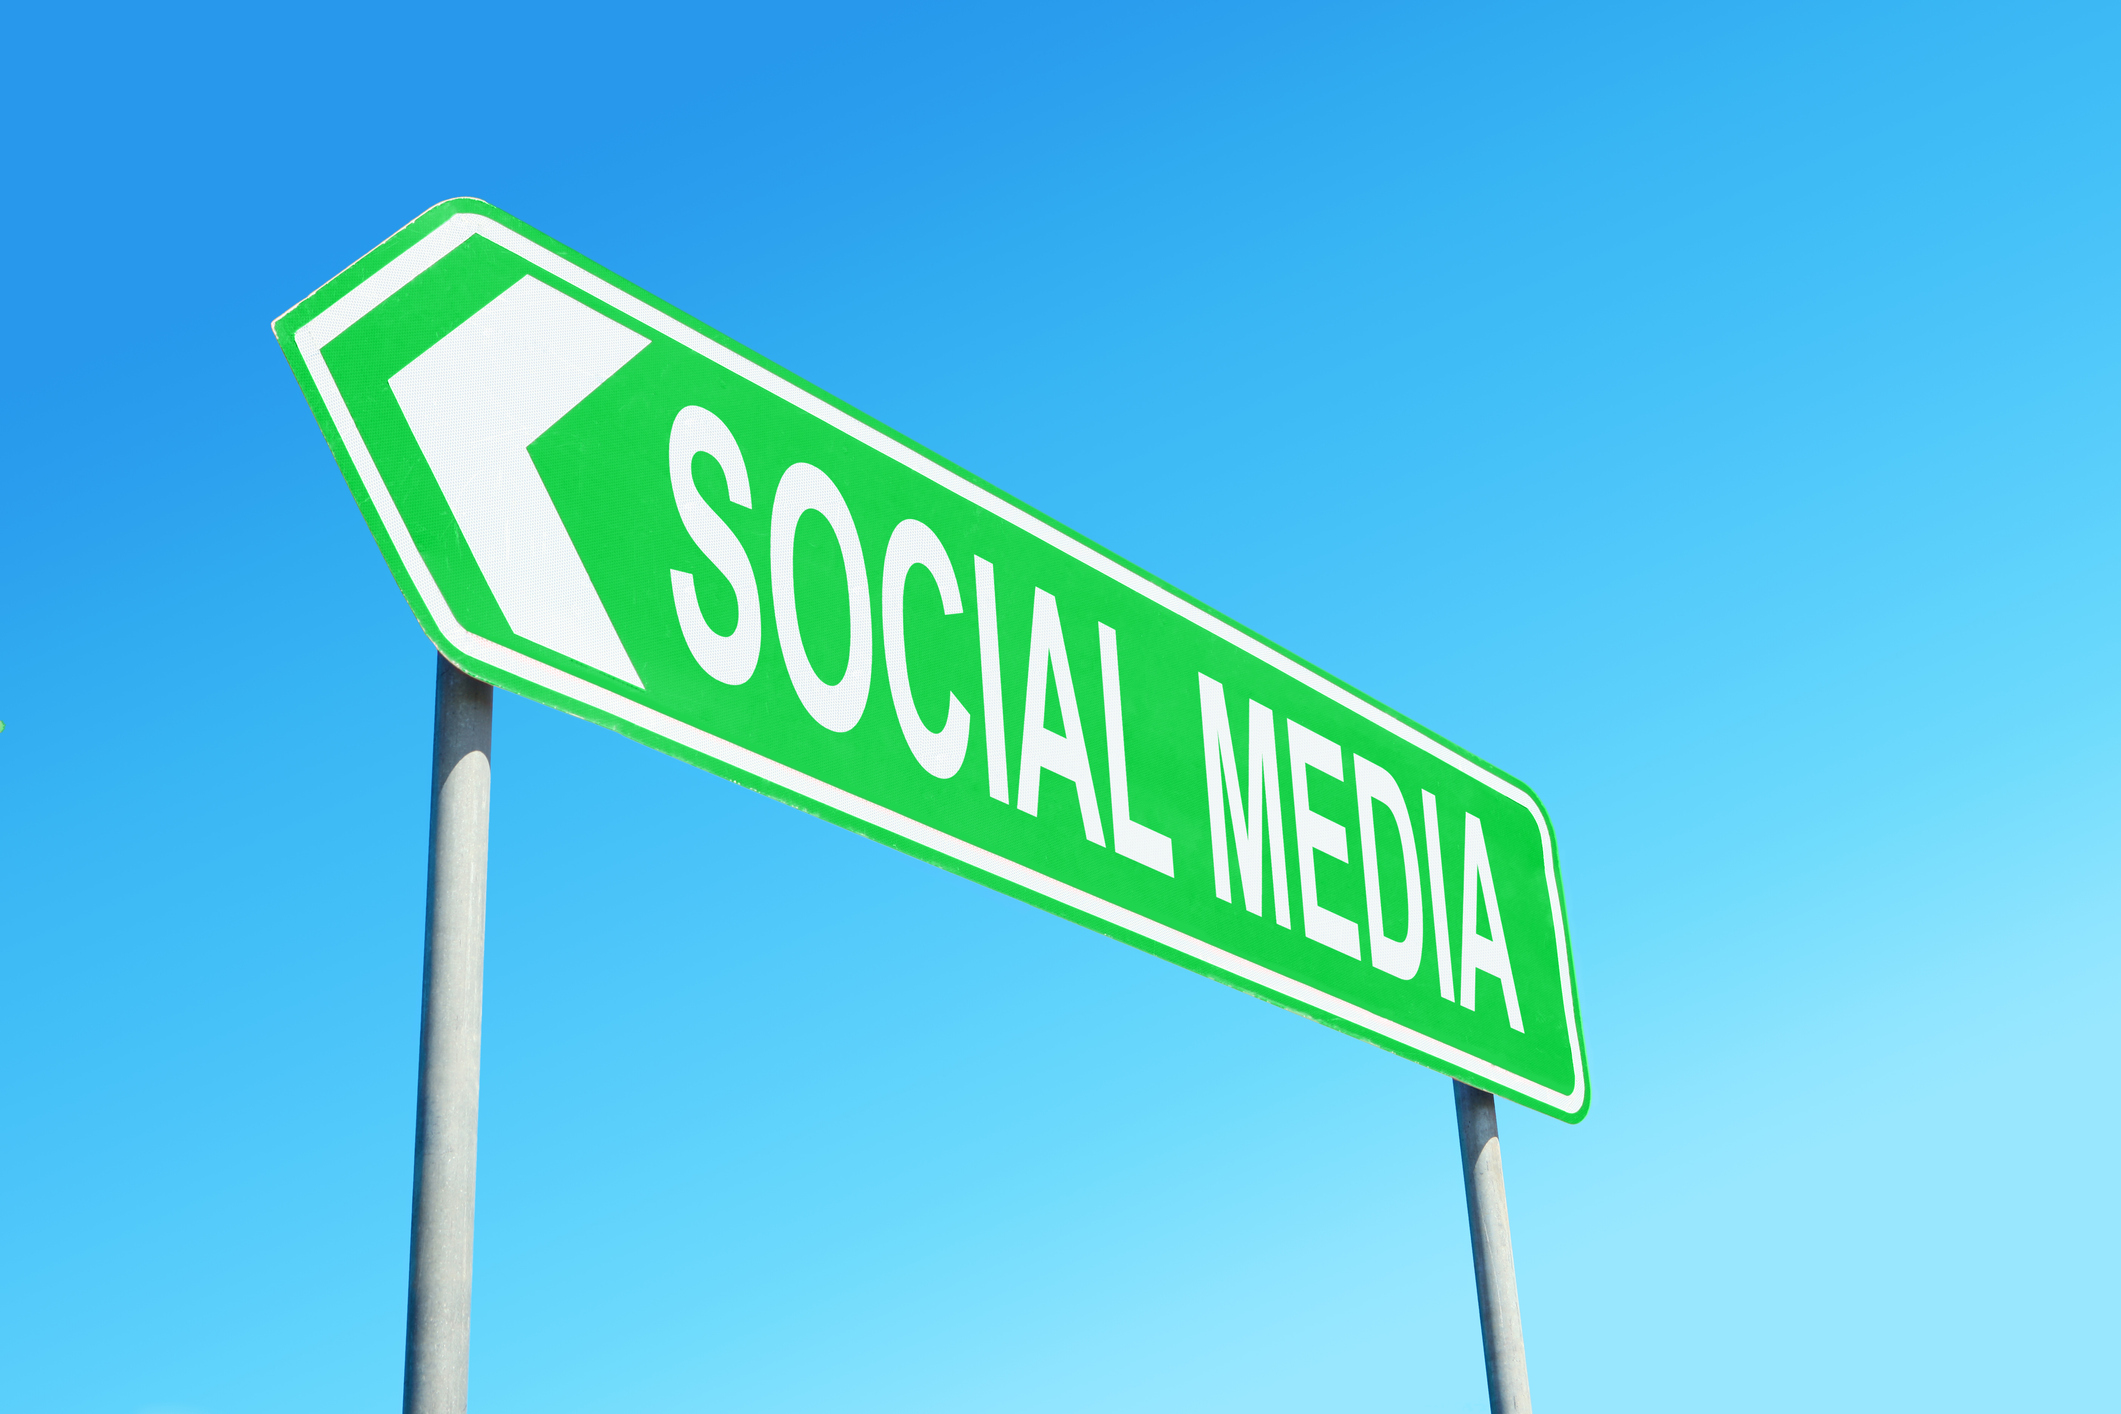 Otololaryngologists recognize the need for more social media content.